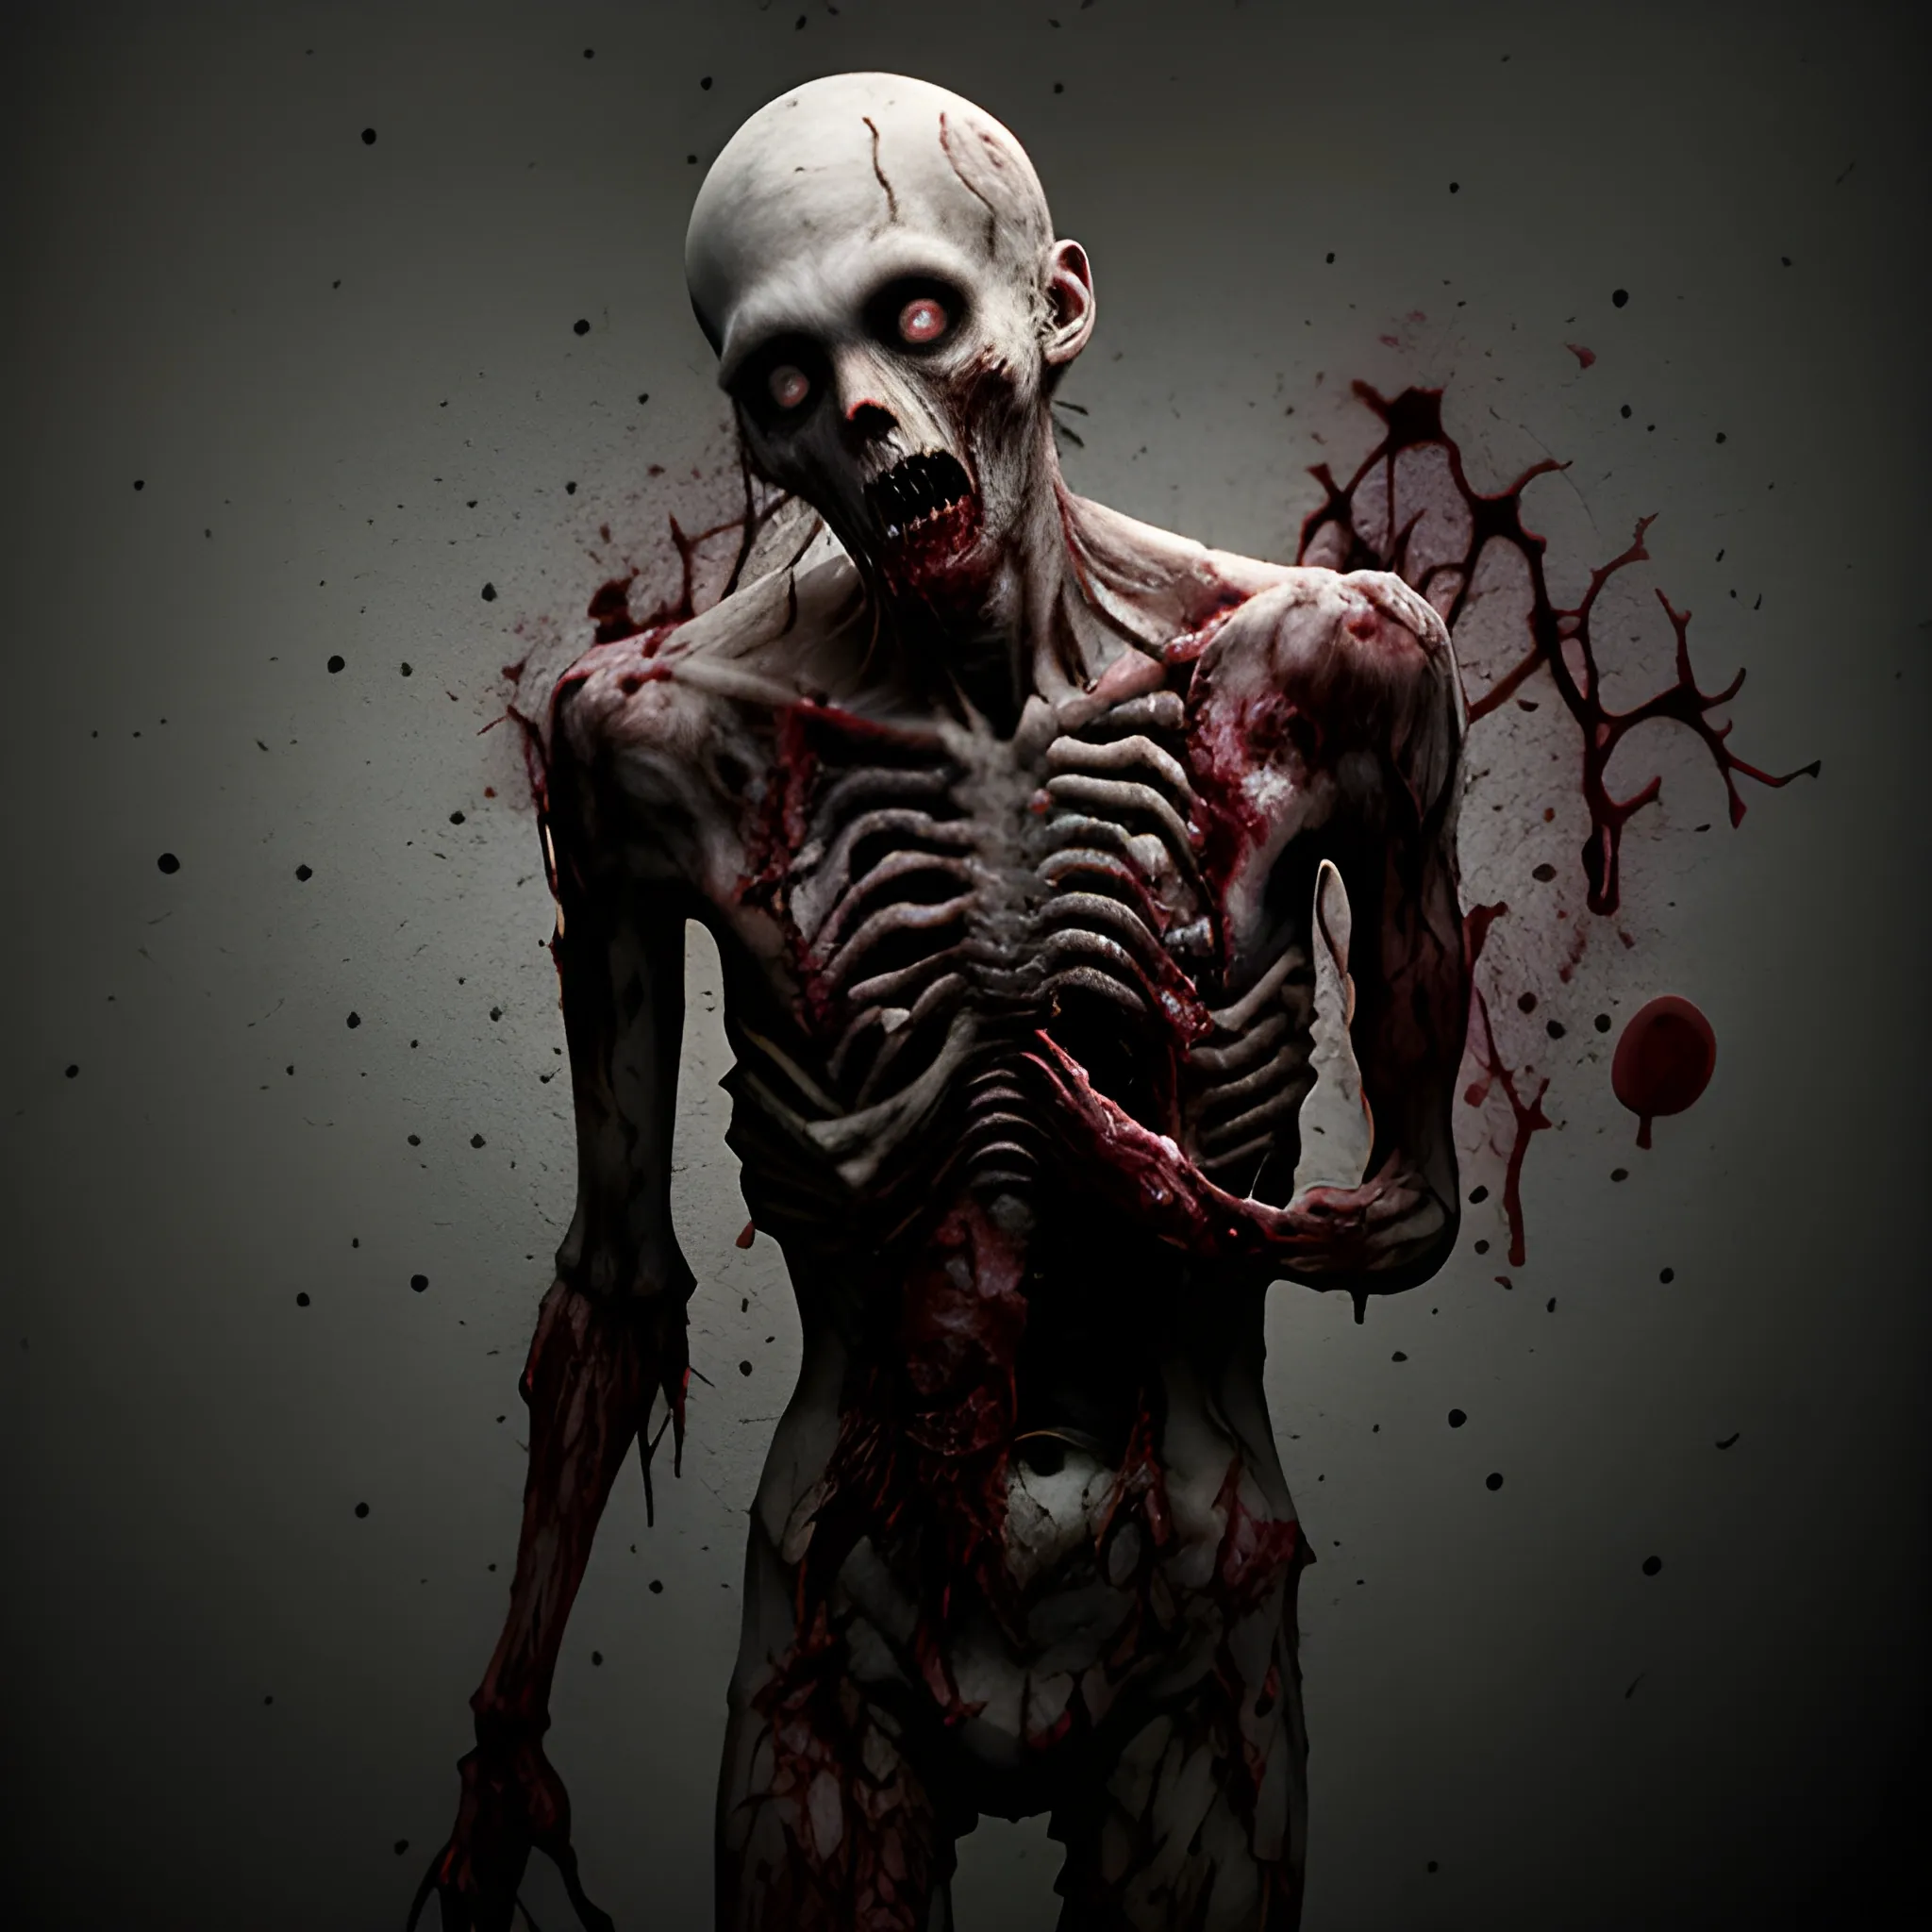 A FULL BODY OF ZOMBIE-LIKE INDIVIDUAL POSSESSES A CRANIUM WITHIN HIS CORPOREAL FORM COMPOSED OF FLESH AND BLOOD. 